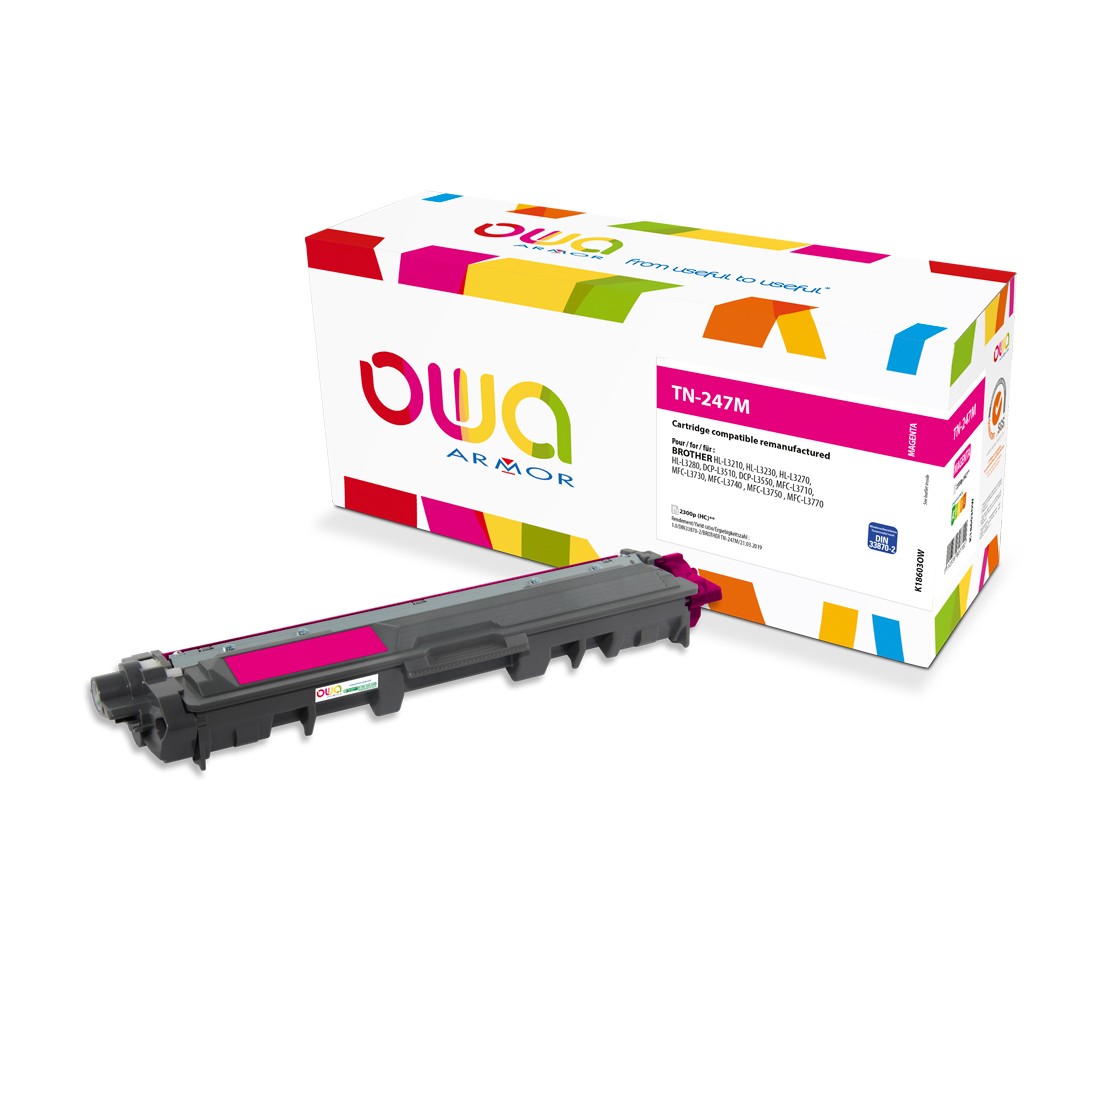 Cartouche laser compatible Brother TN247 - magenta - Owa K18603OW